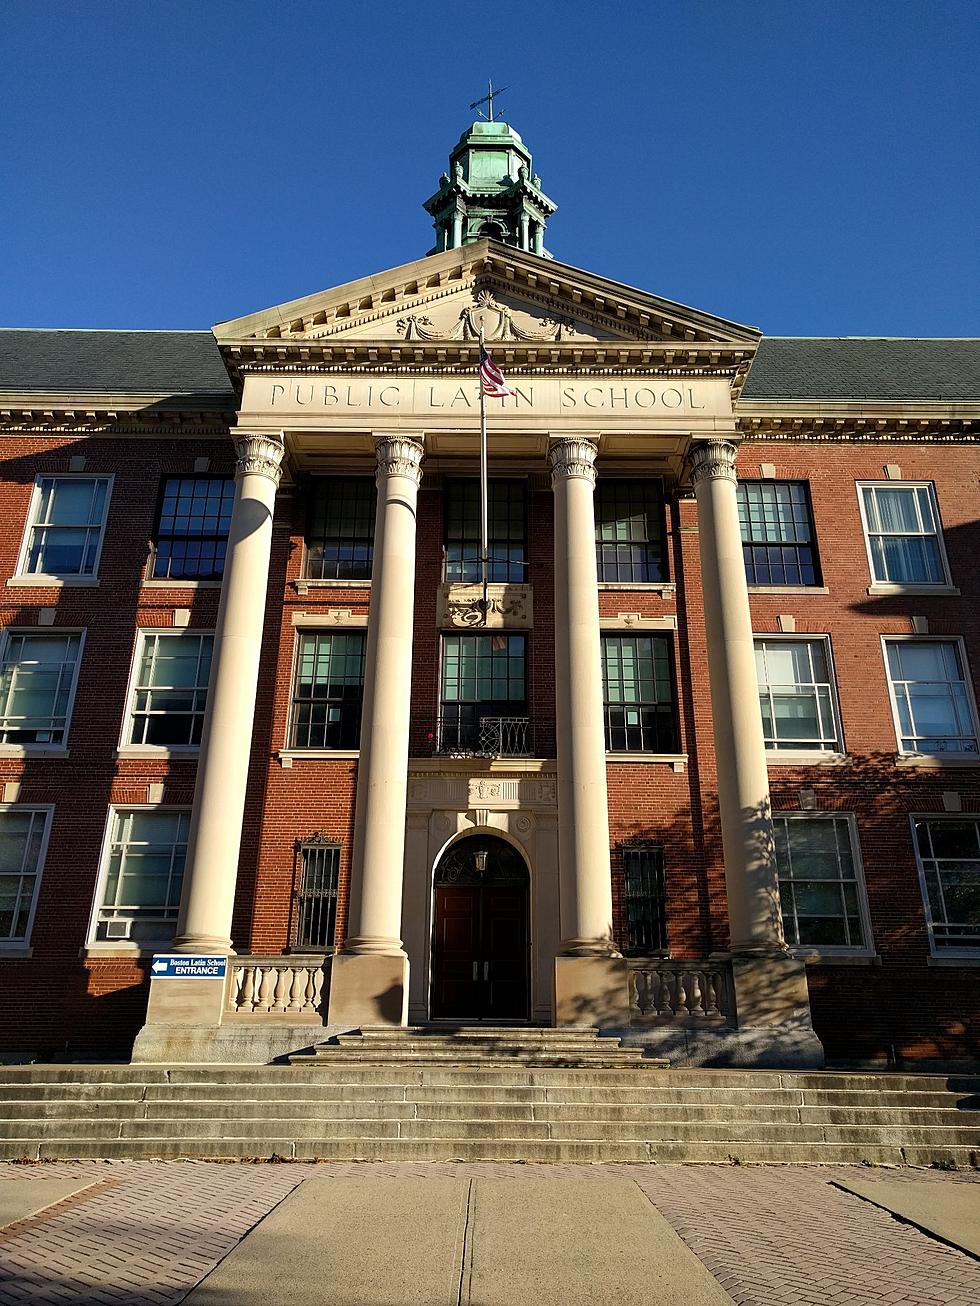 These Massachusetts High Schools Are the Oldest Schools in the United States